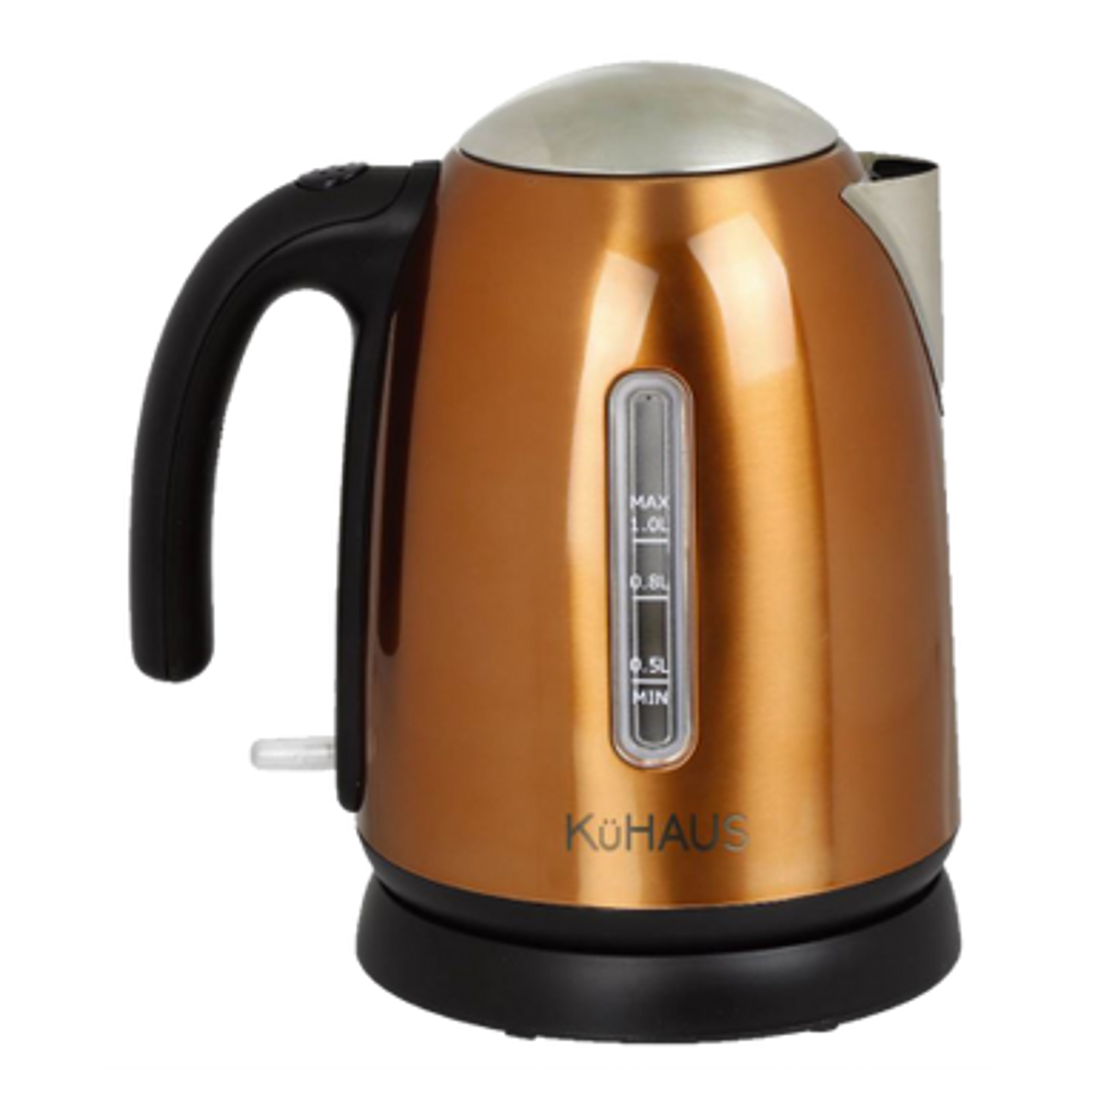 KuHAUS Stainless Steel Electric Kettle Bronze 40.57 fl.oz(1.2L) - Anytime Basket